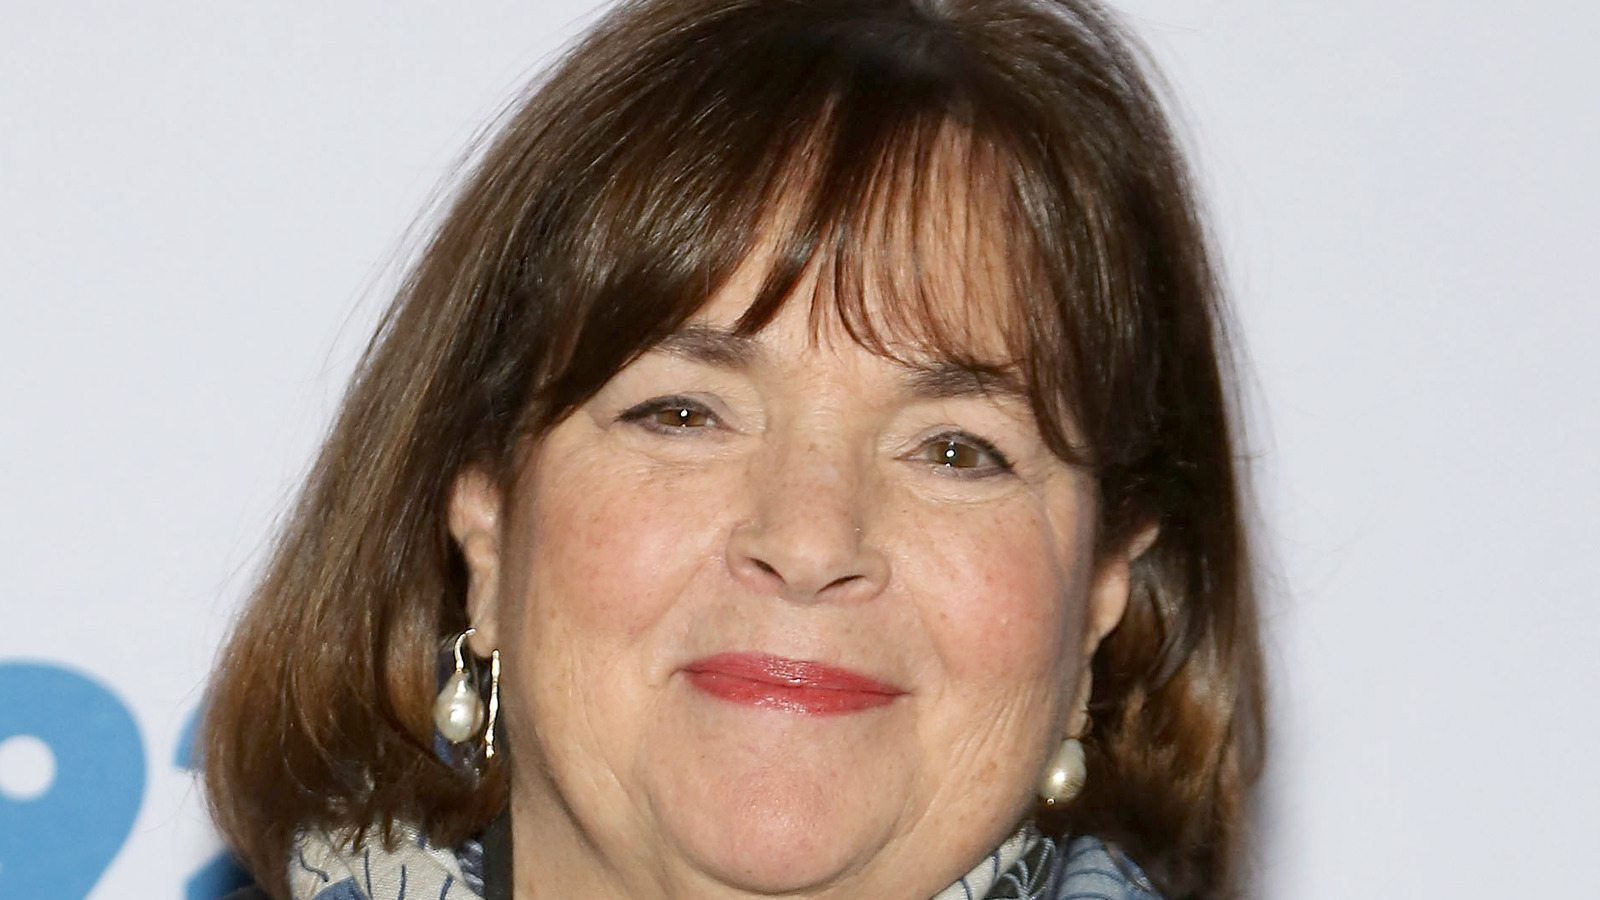 https://www.mashed.com/img/gallery/the-stand-mixer-ina-garten-swears-by/l-intro-1639601283.jpg